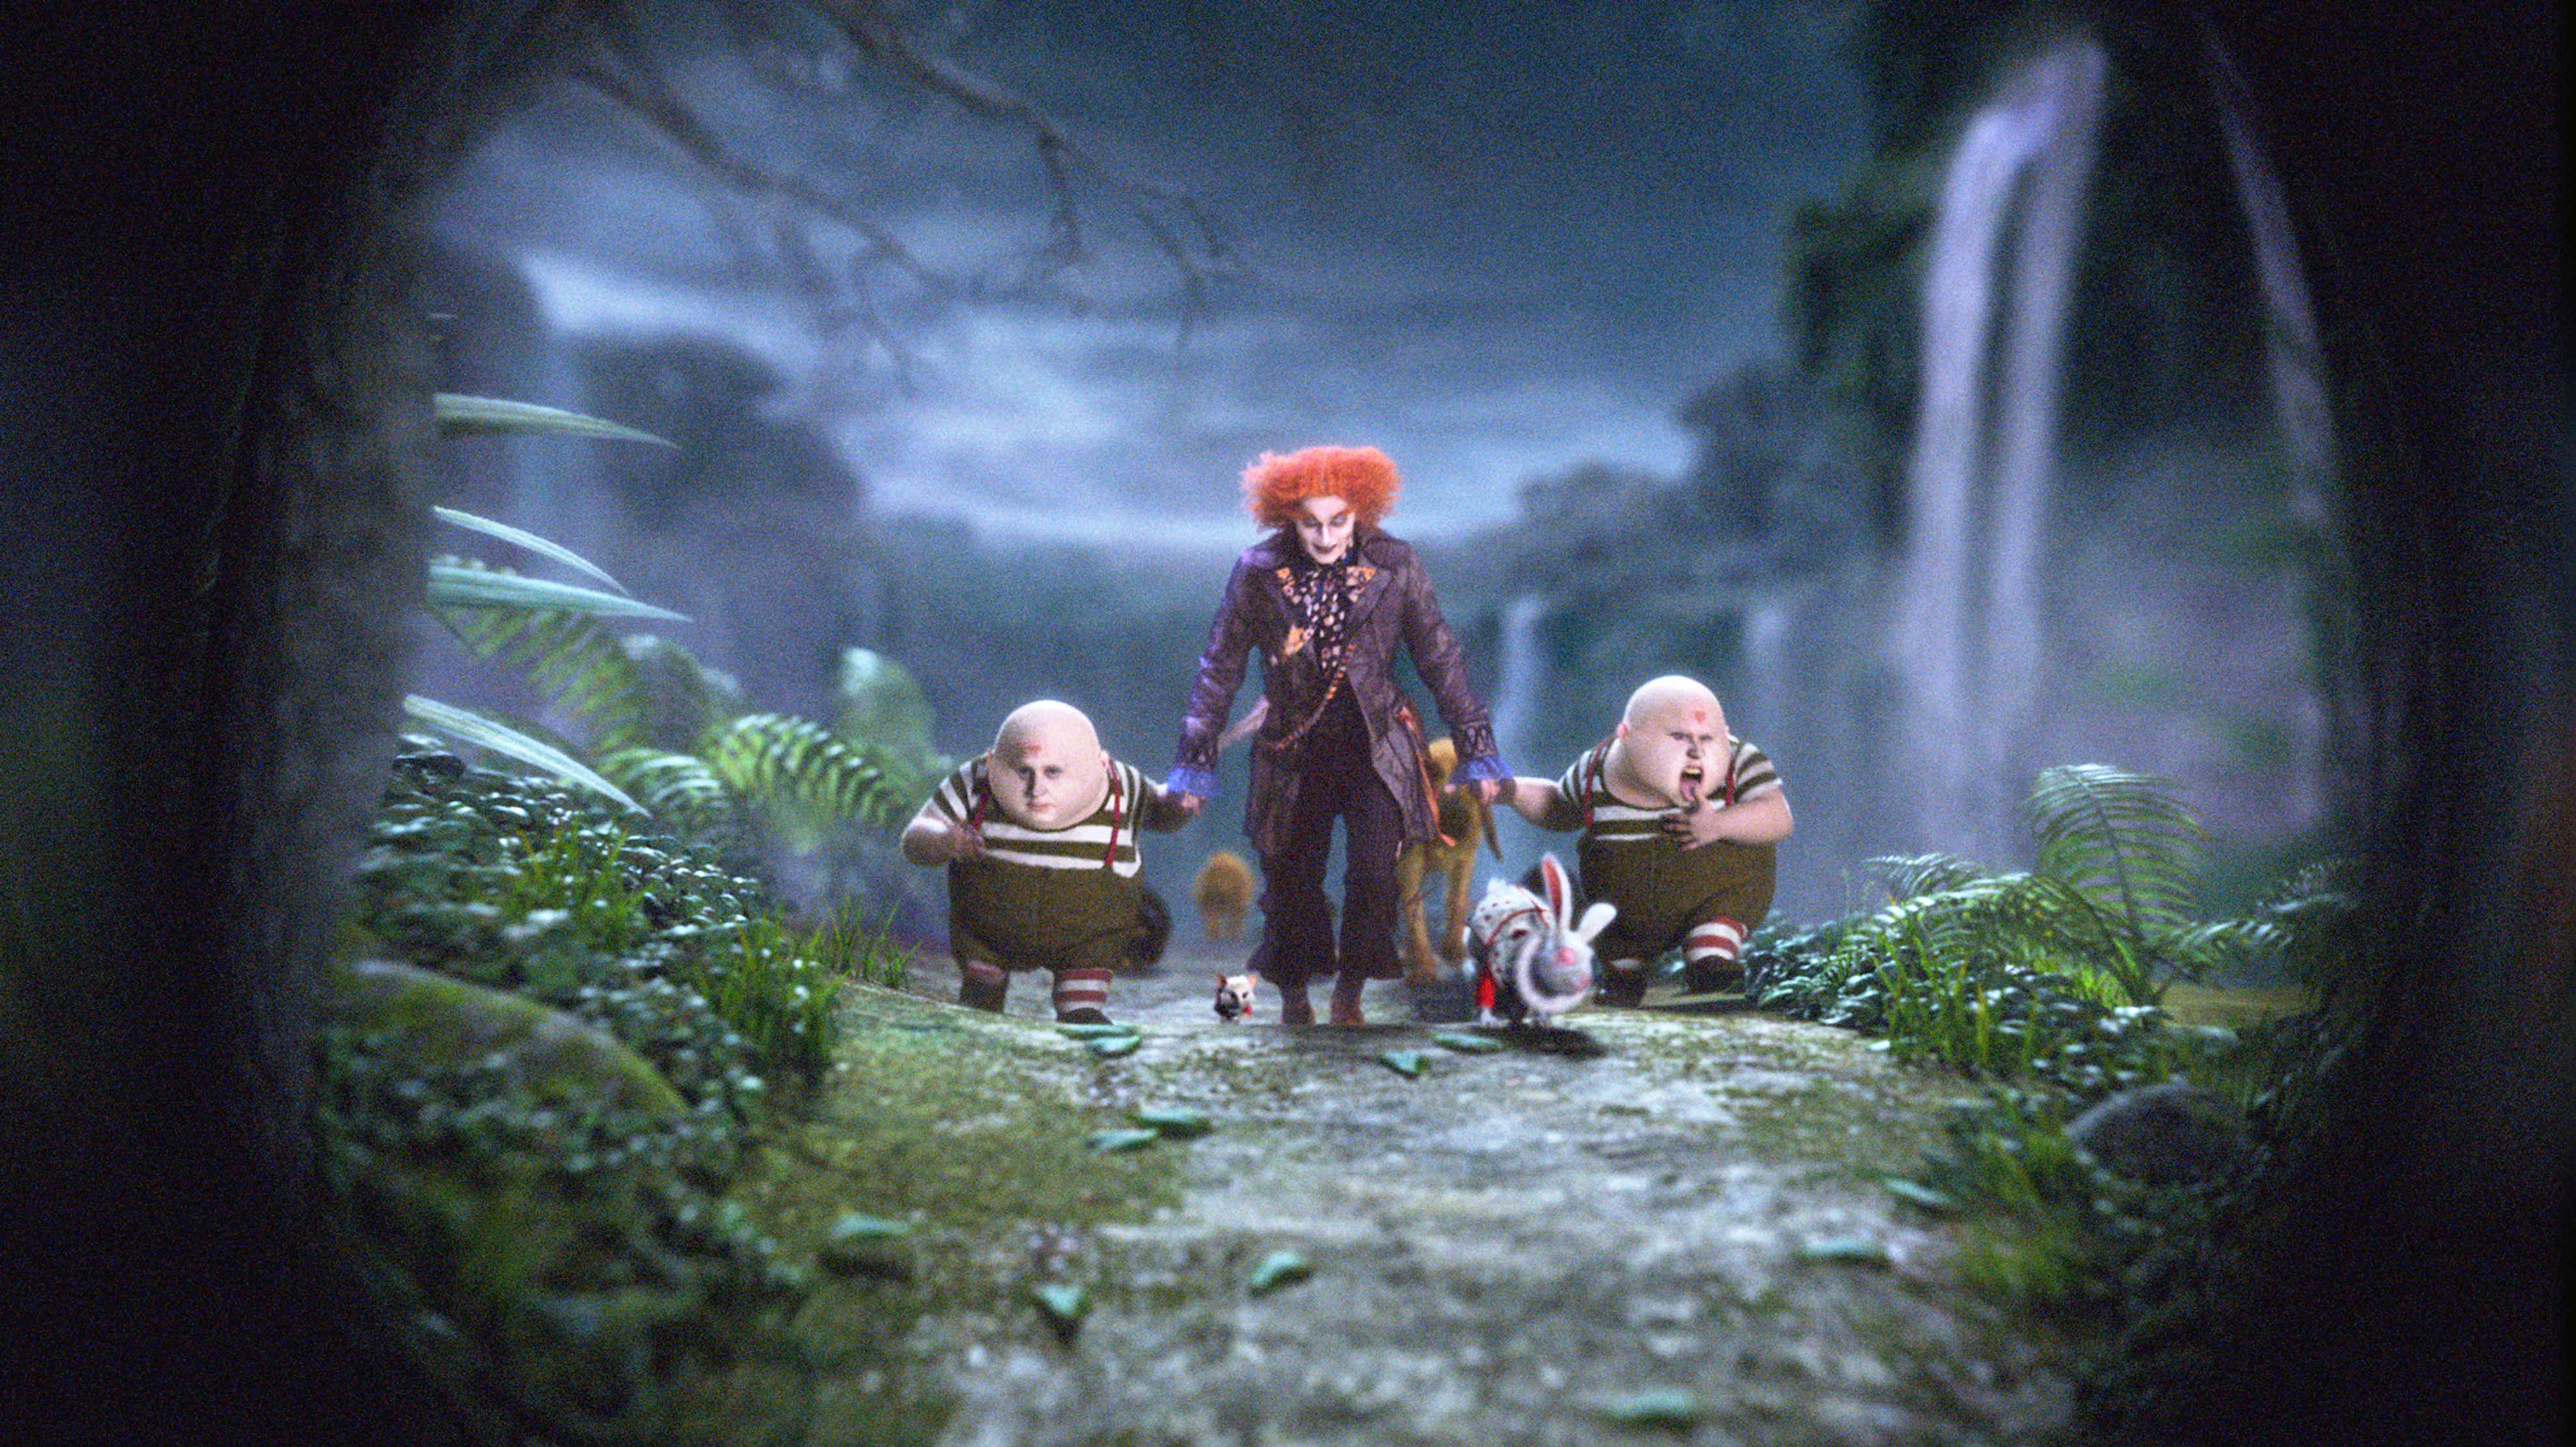 New Featurette and Images From 'Alice in Wonderland' Shared